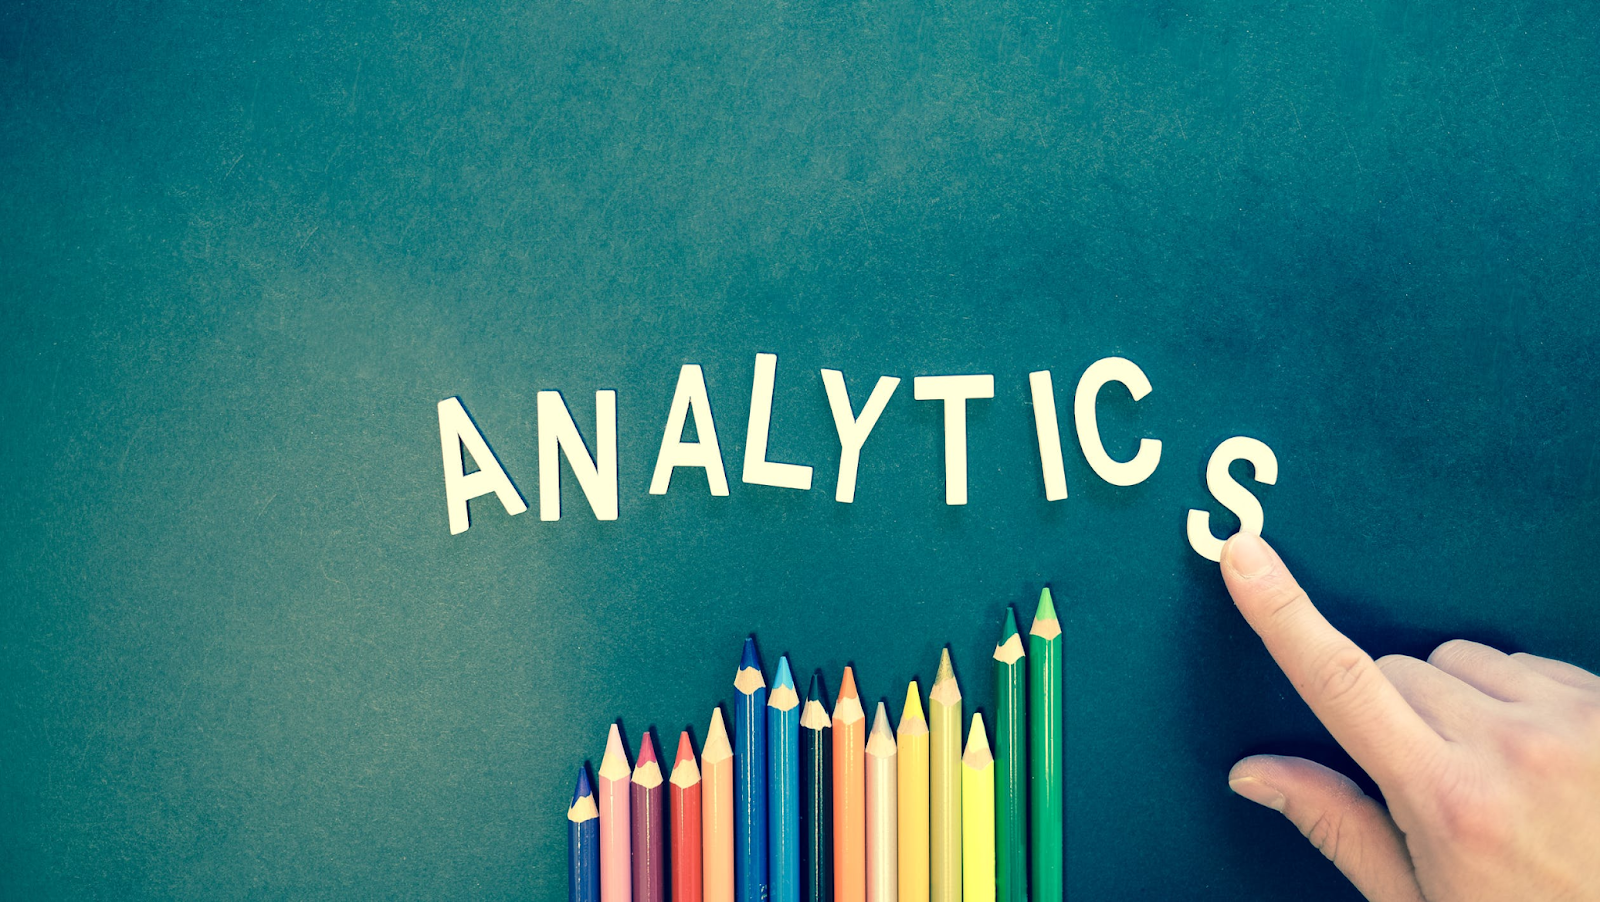 "analytics" is spelled out with colored pens representing a line graph which is important to keep track of the effectiveness of you advertising